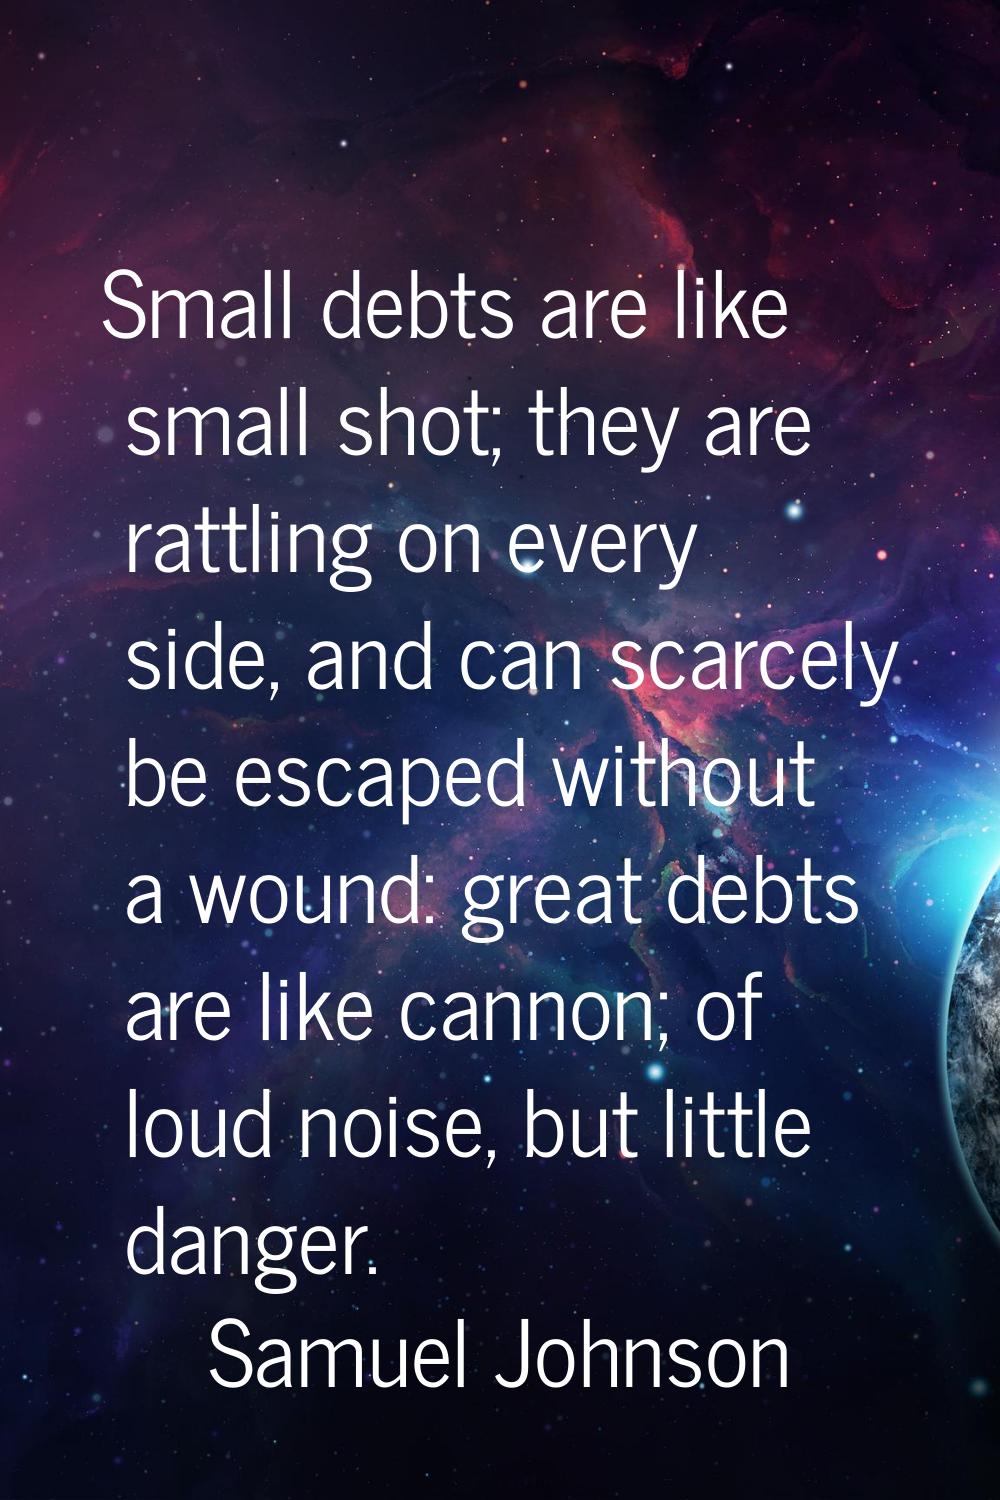 Small debts are like small shot; they are rattling on every side, and can scarcely be escaped witho